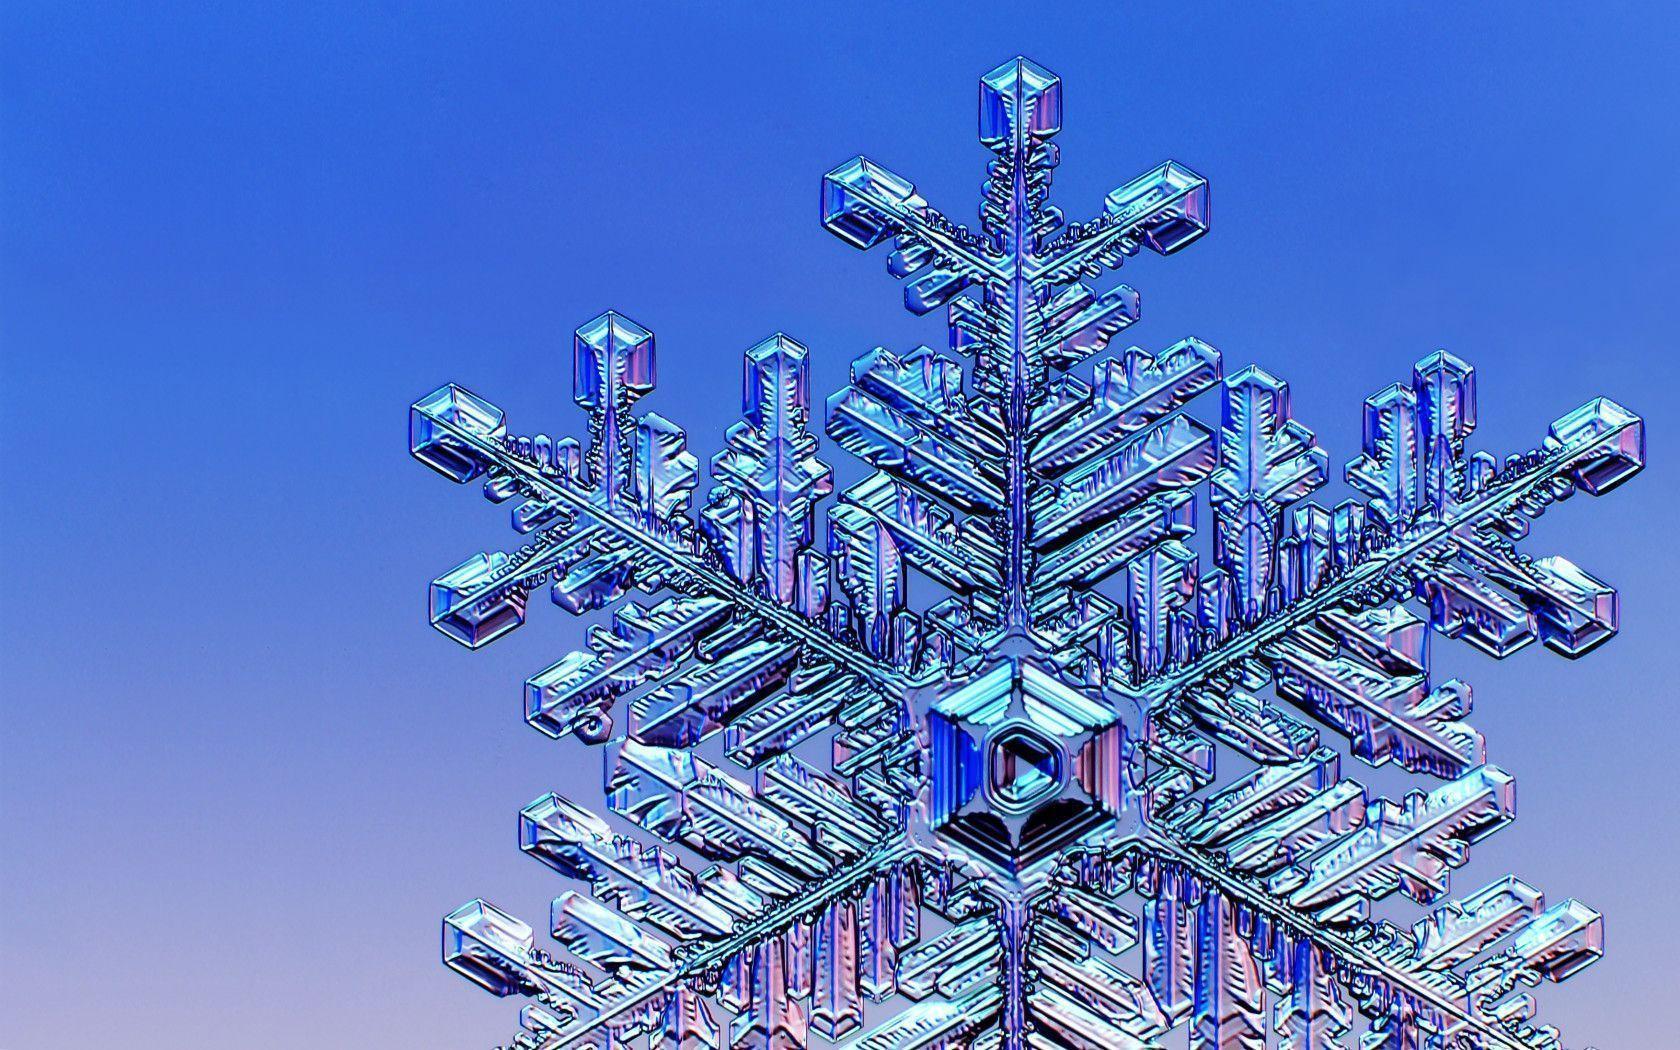 Snowflakes and Snow Crystals